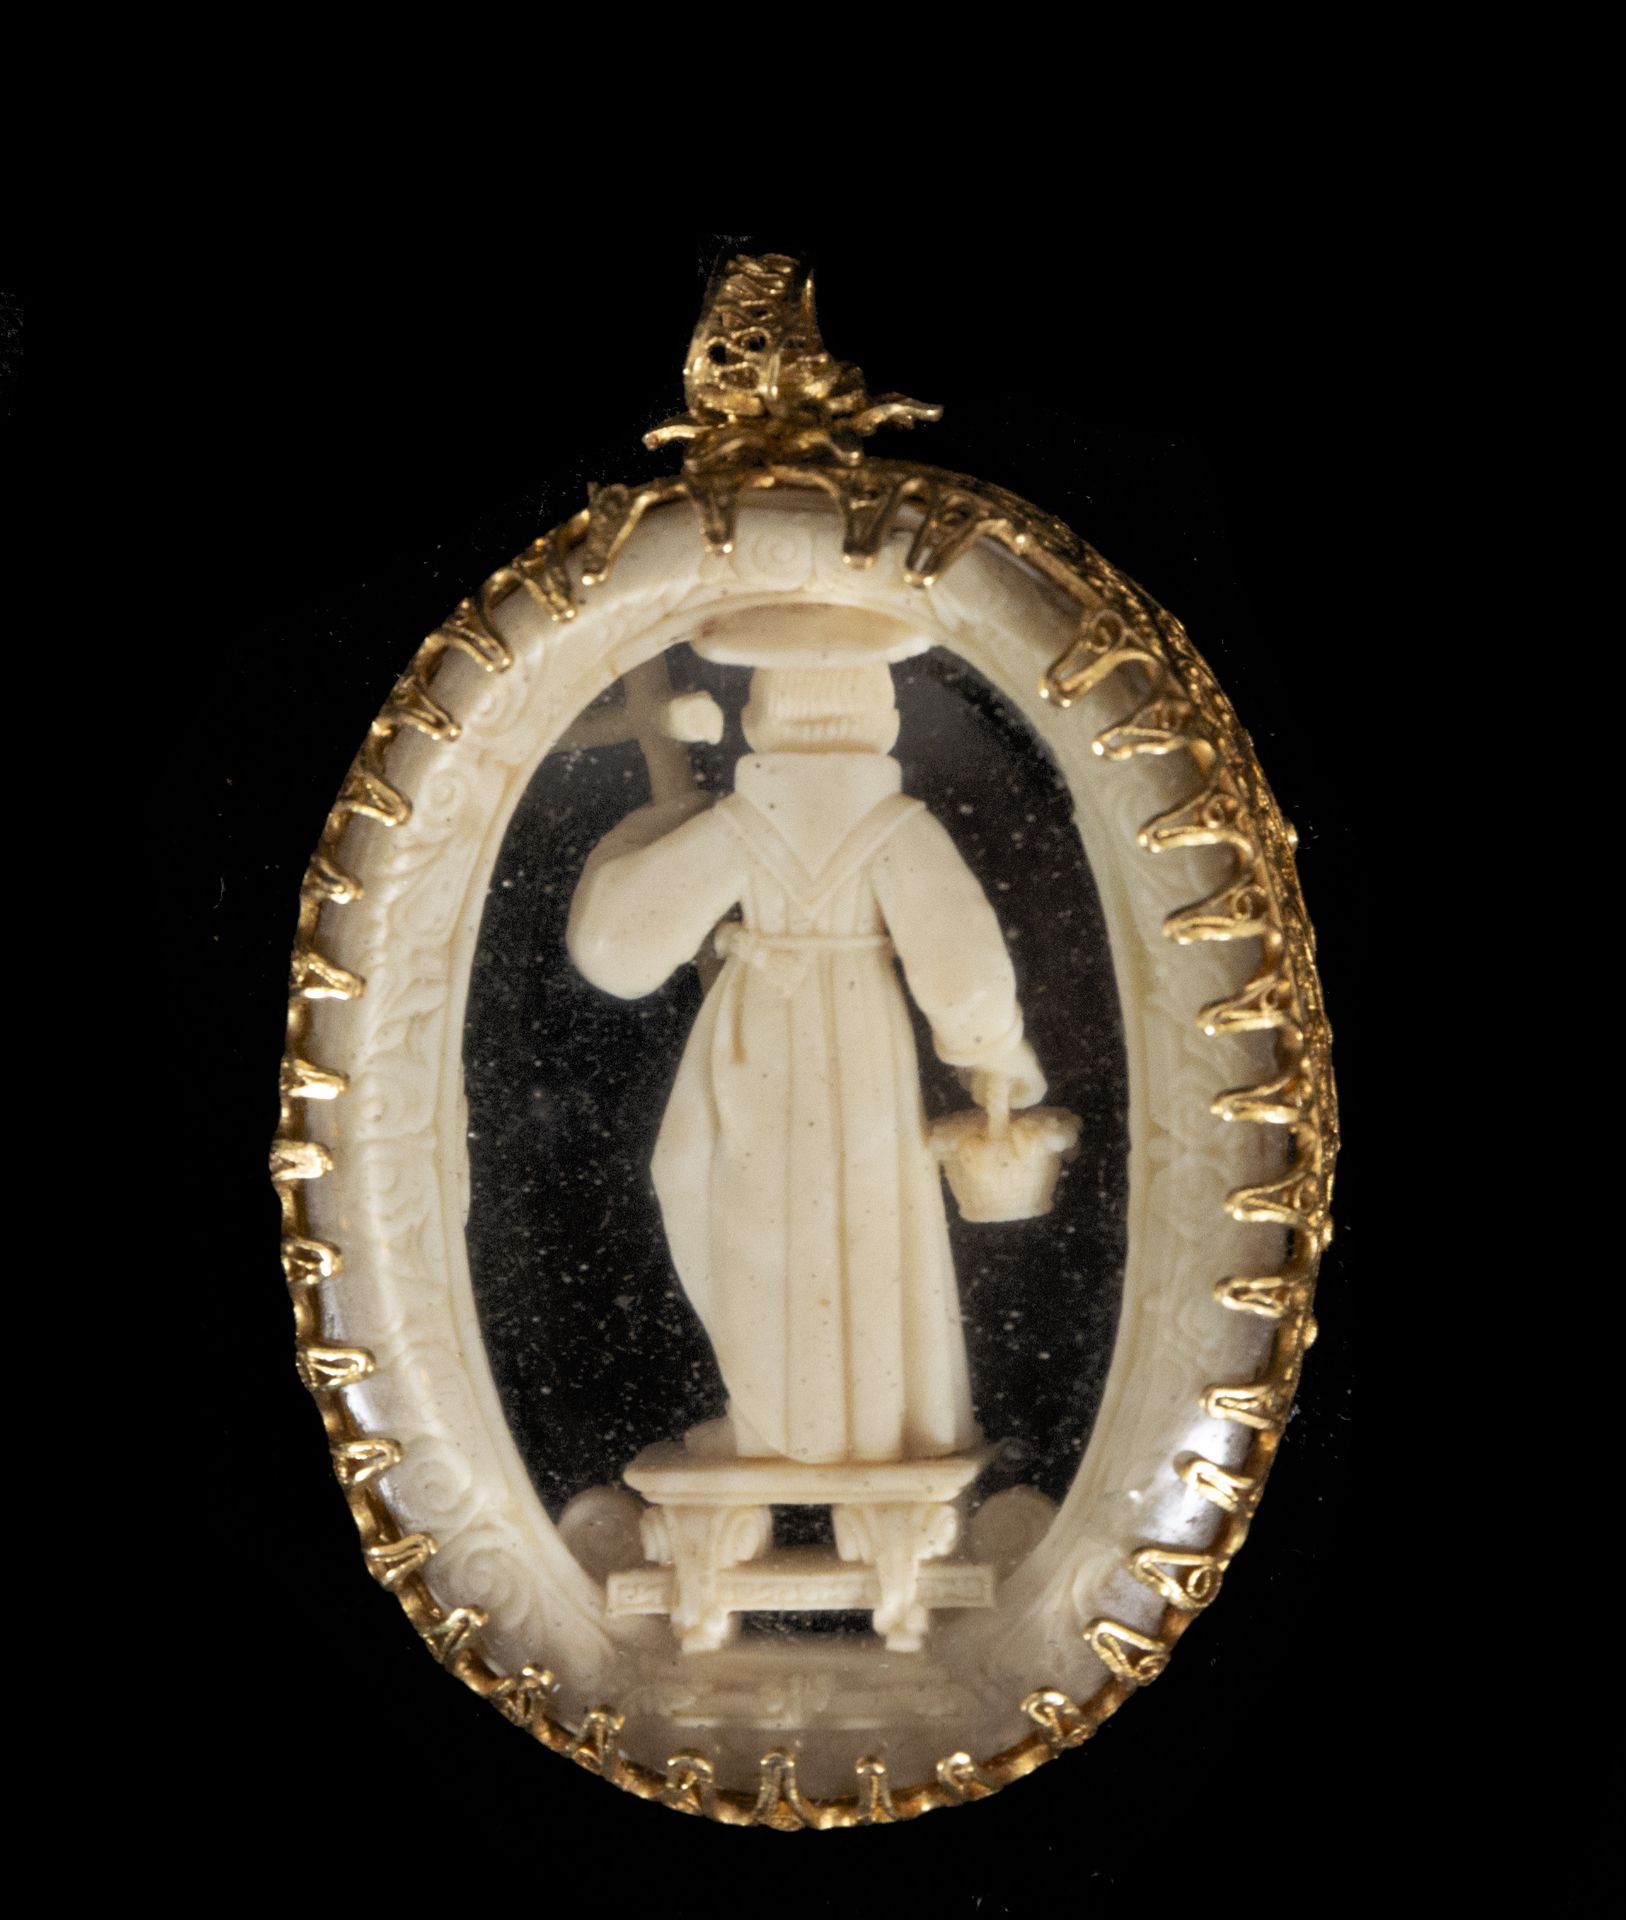 Rare and exquisite 17th century Reliquary Medallion pendant in Portuguese colonial gold and ivory fi - Image 2 of 2